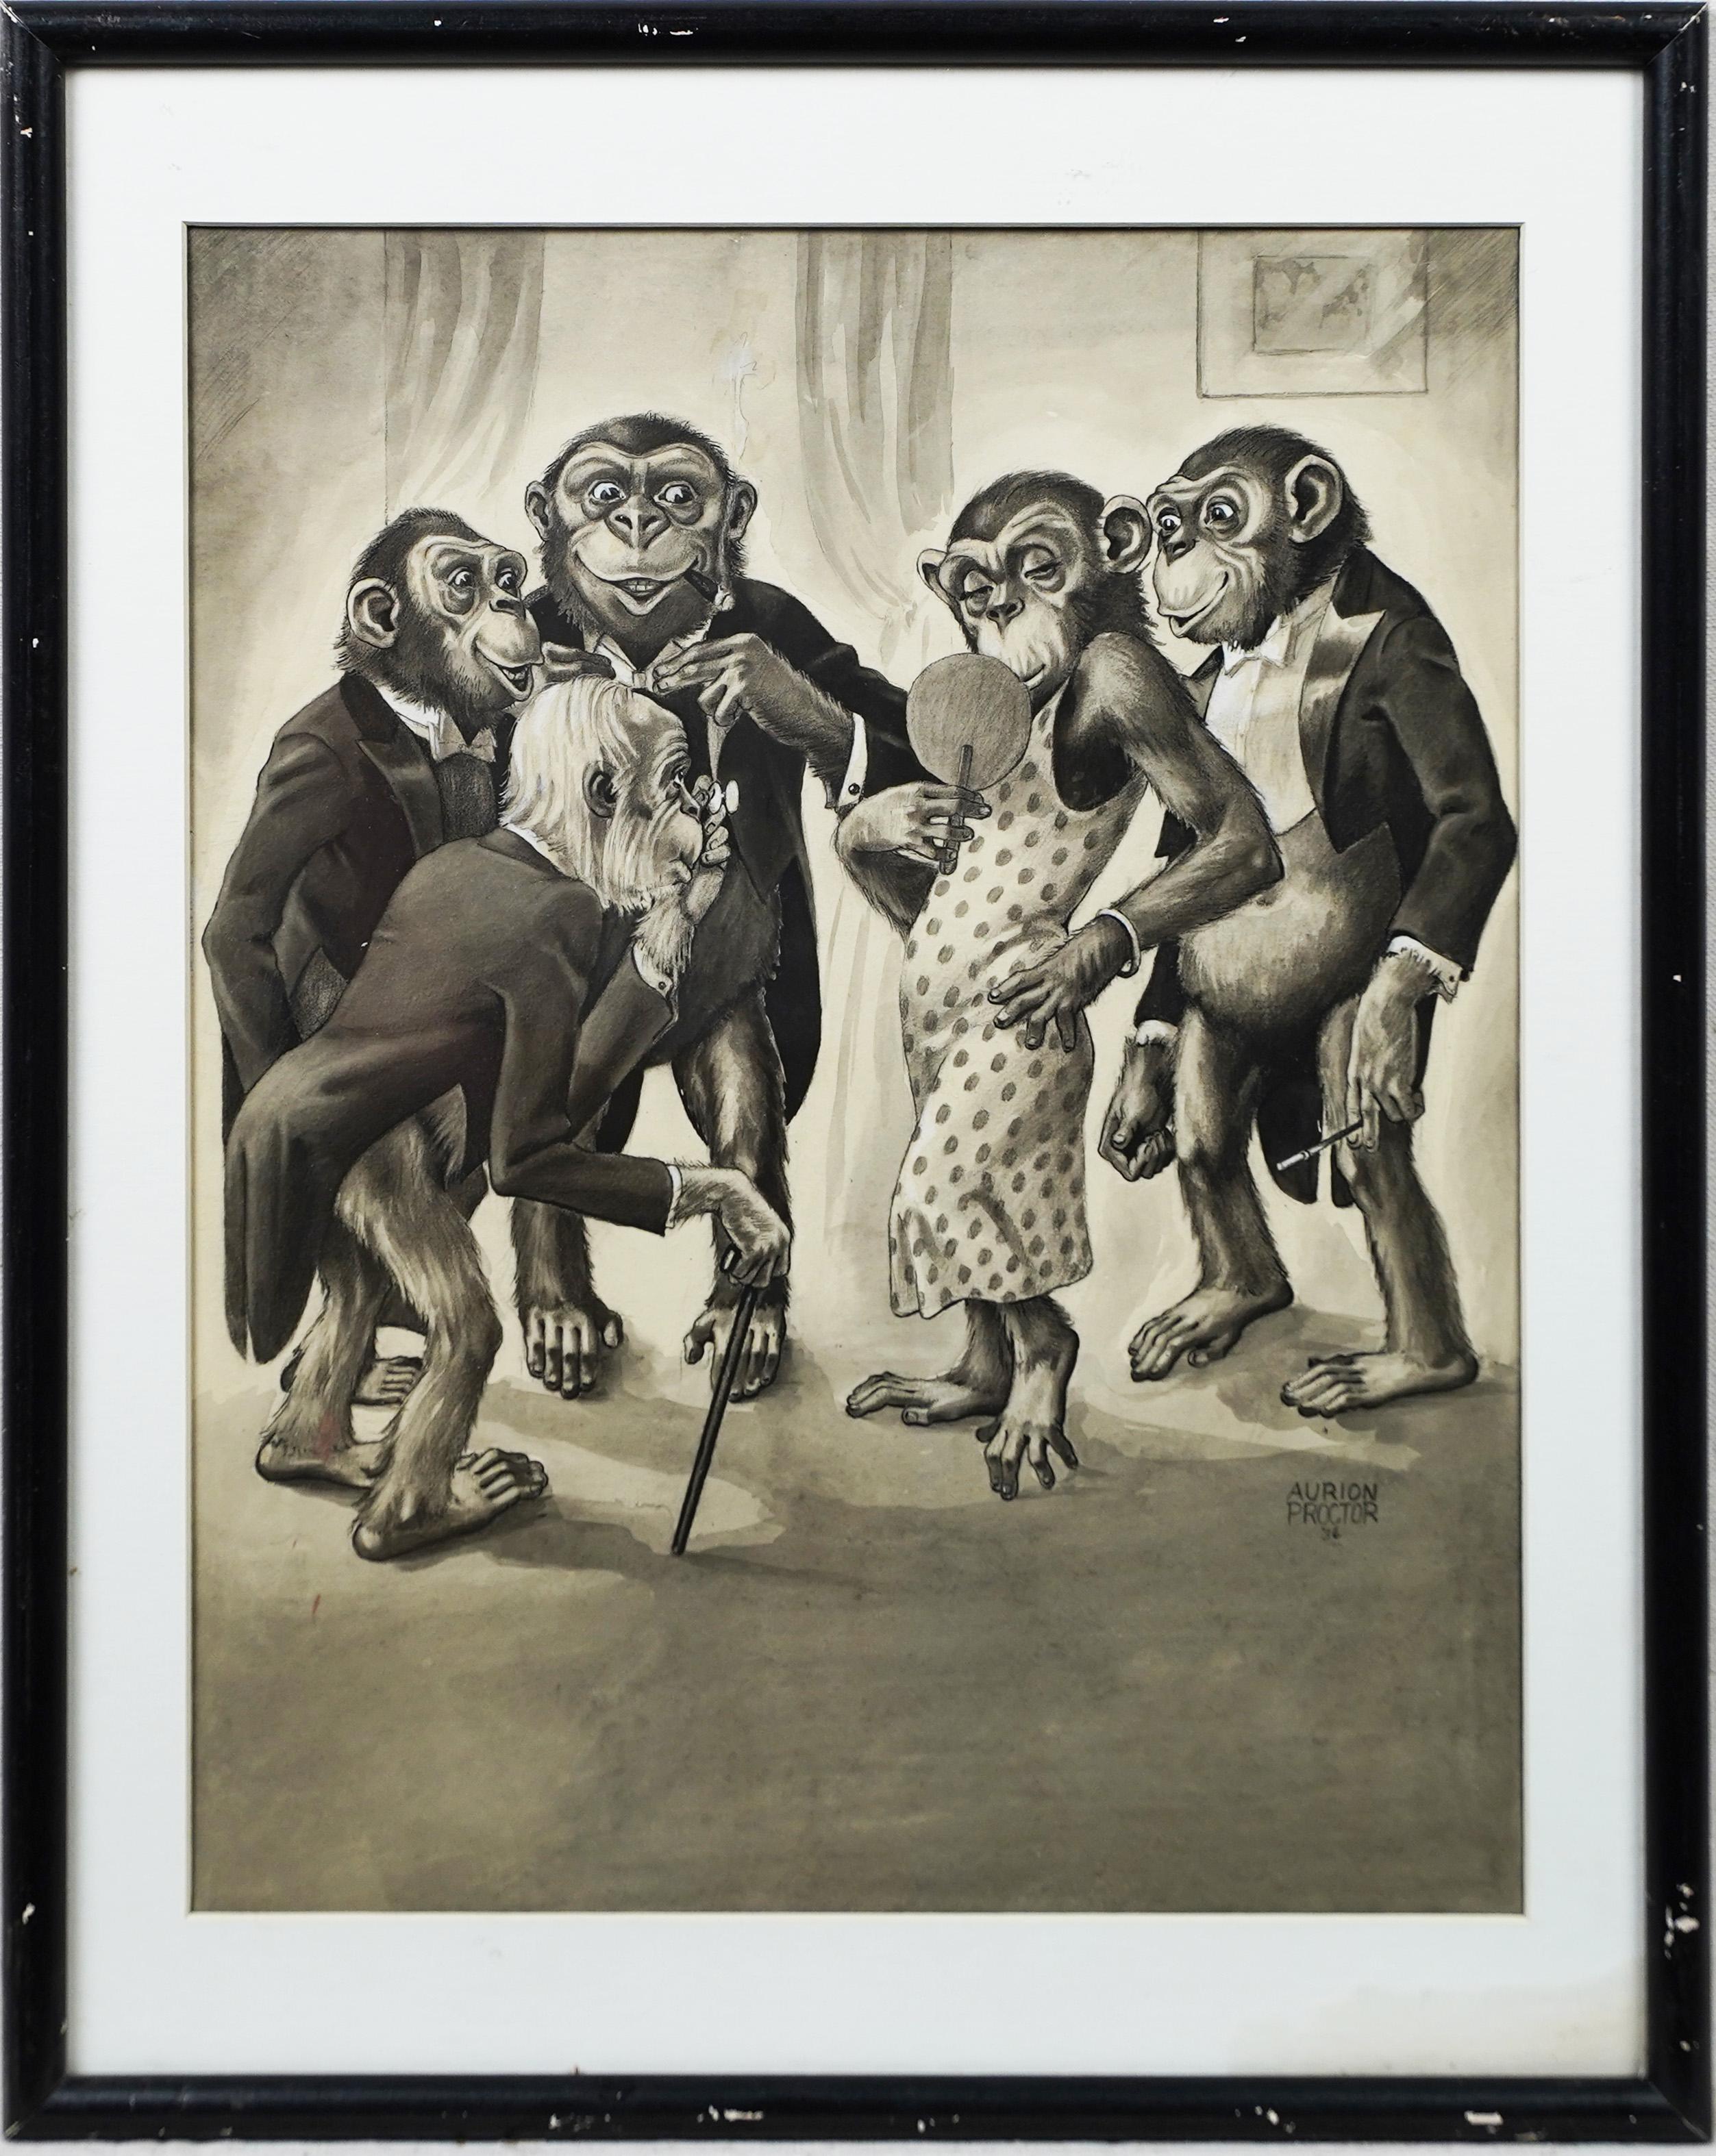 Aurion M. Proctor Animal Painting - Antique American Surreal Anamorphic Signed Beautiful Monkey Humorous Drawing 